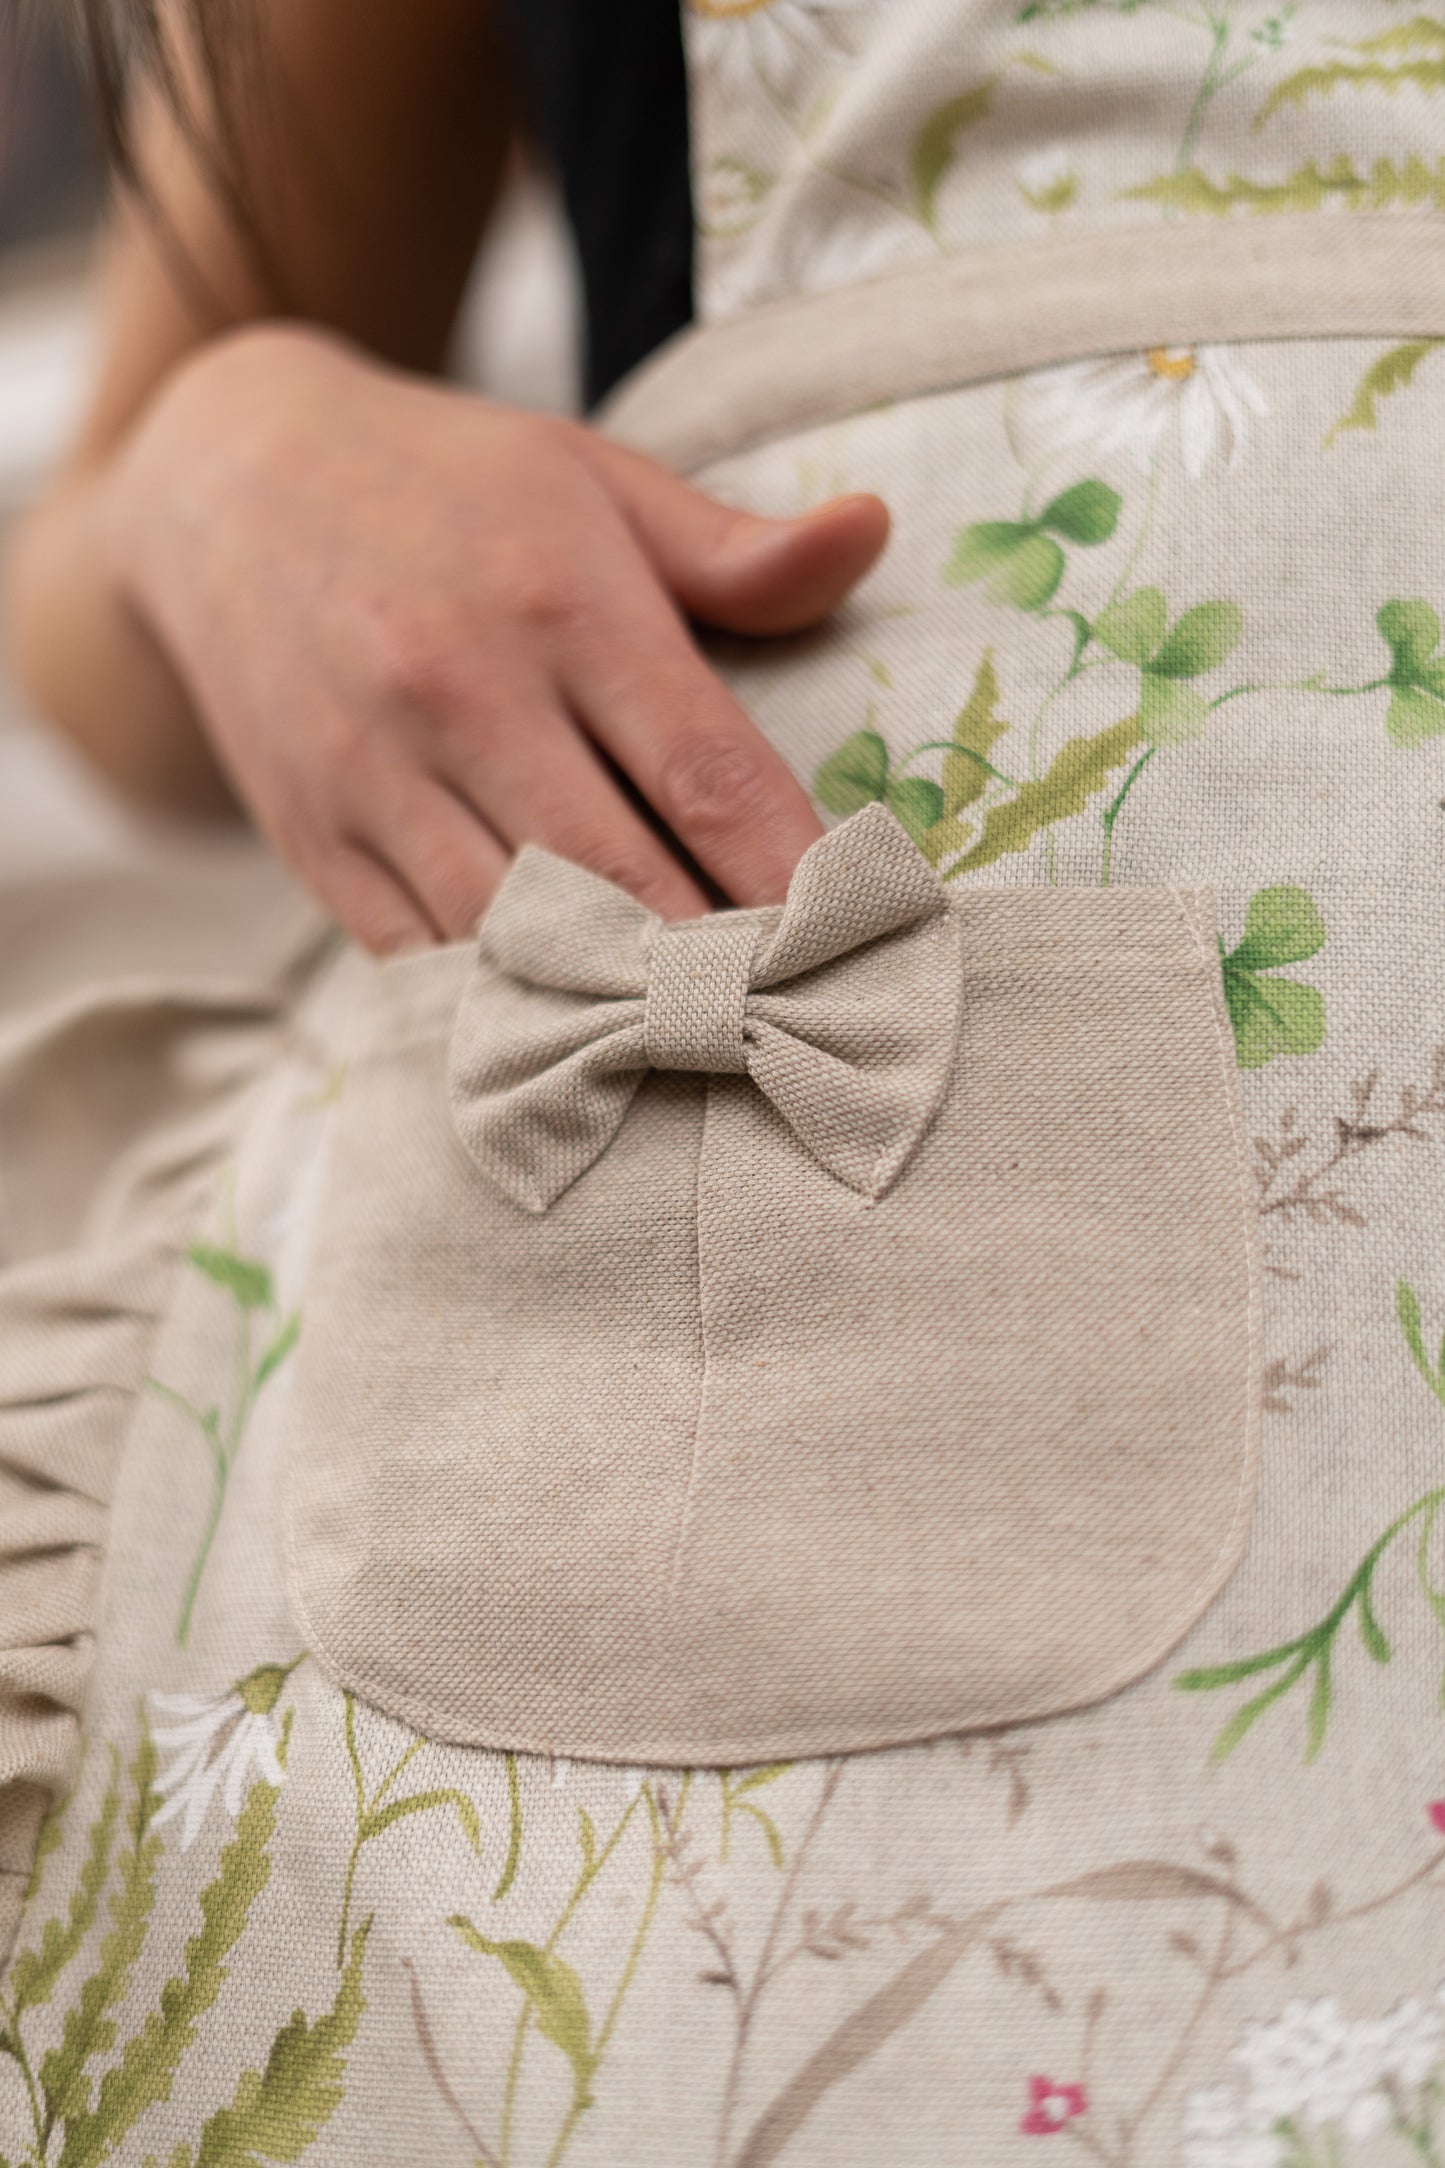 Ladies Half Apron with Ruffles, Poly-Cotton Mix, Printed | Meadow Flowers